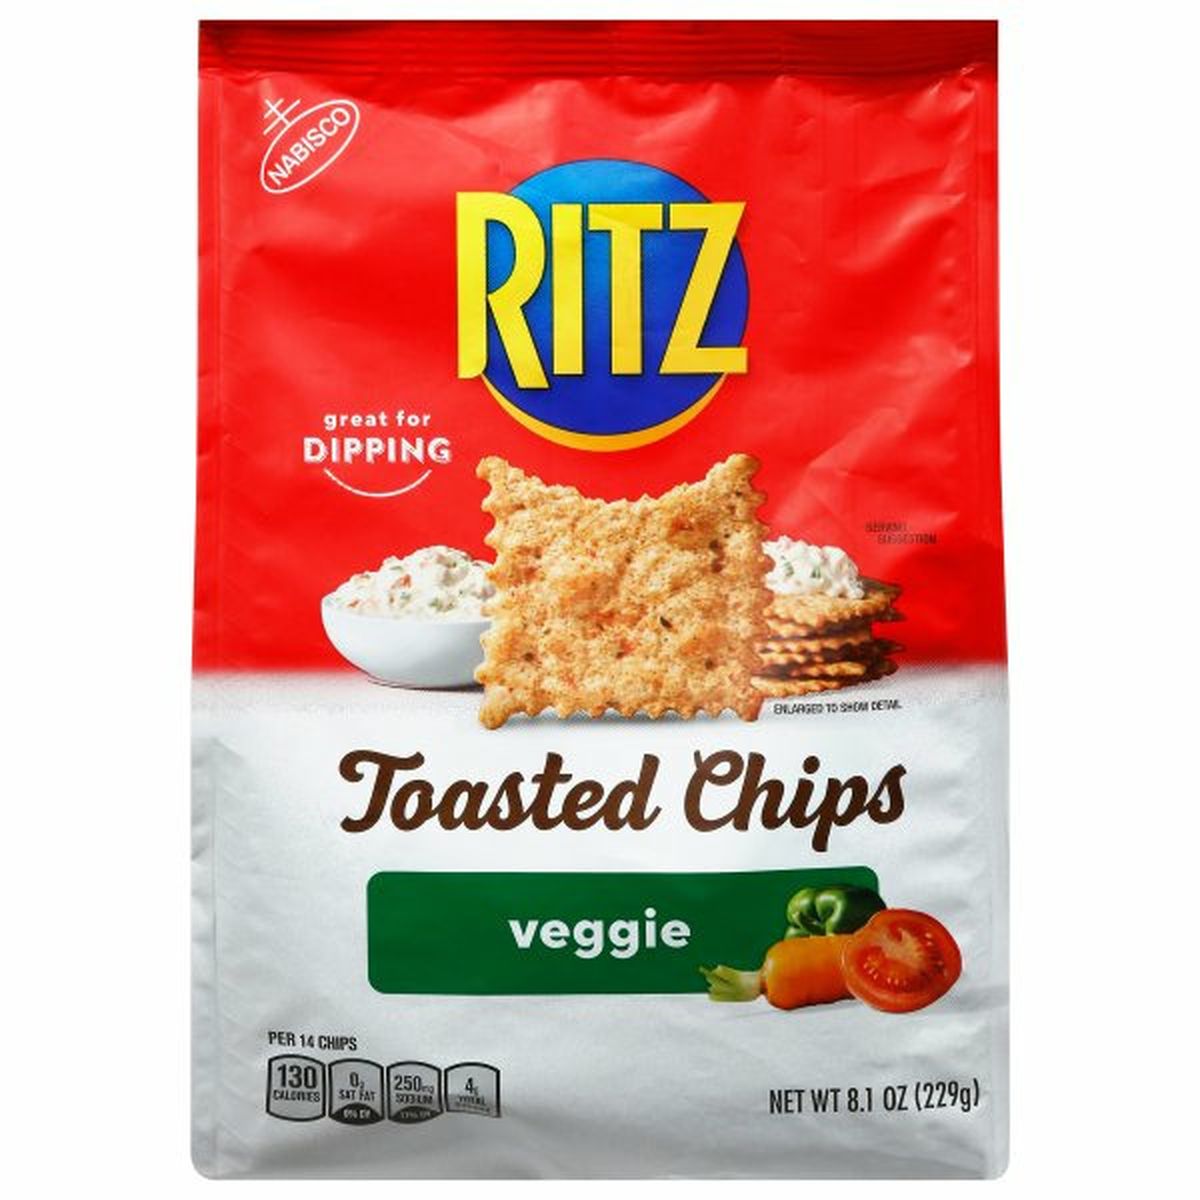 Calories in Ritz Toasted Chips, Veggie